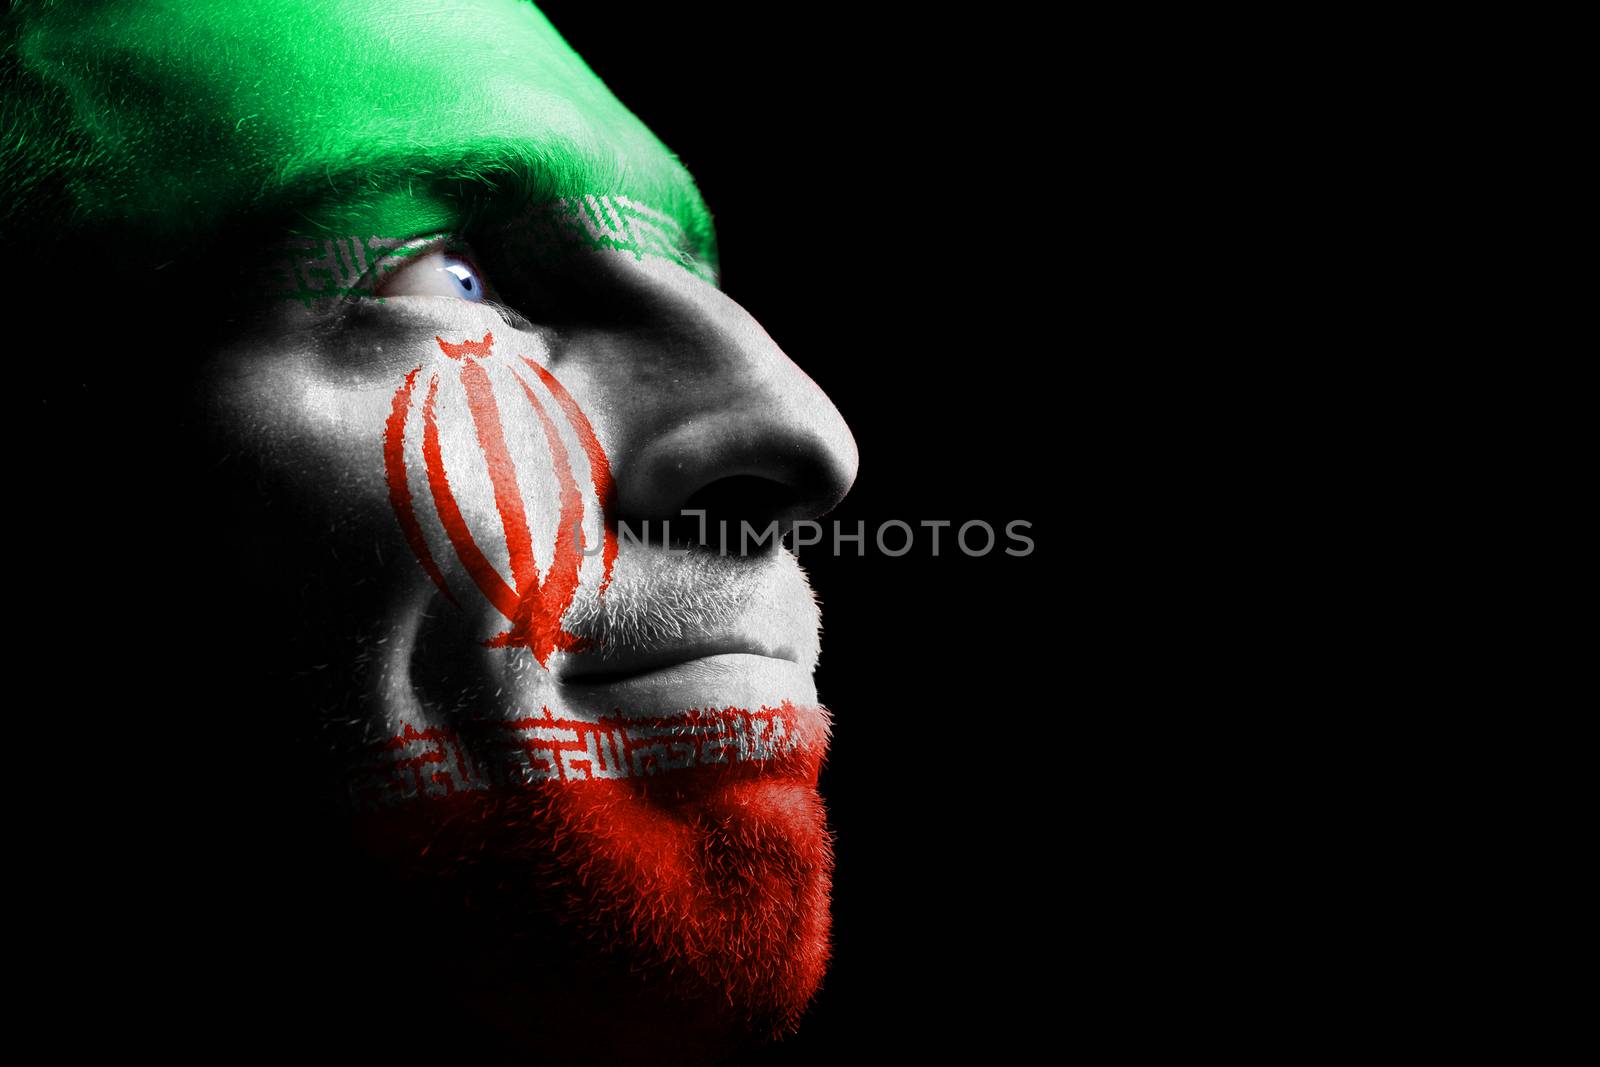 Sports fan from Iran. Isolated on black.